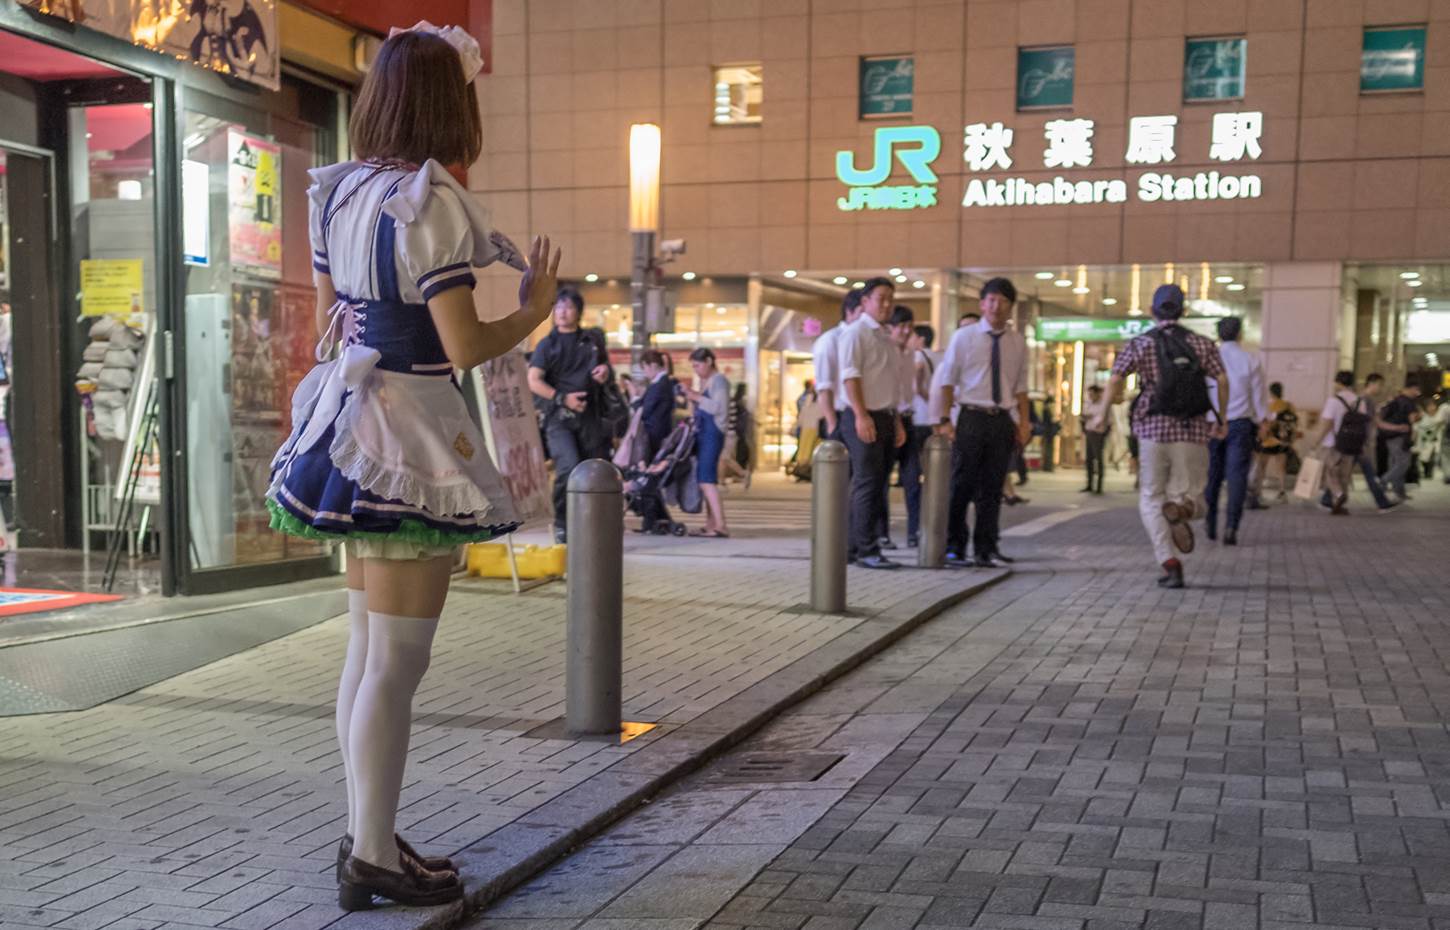 Japanese in maid dress trying to entice customers into maid cafe in Akihabara=Shutterstock